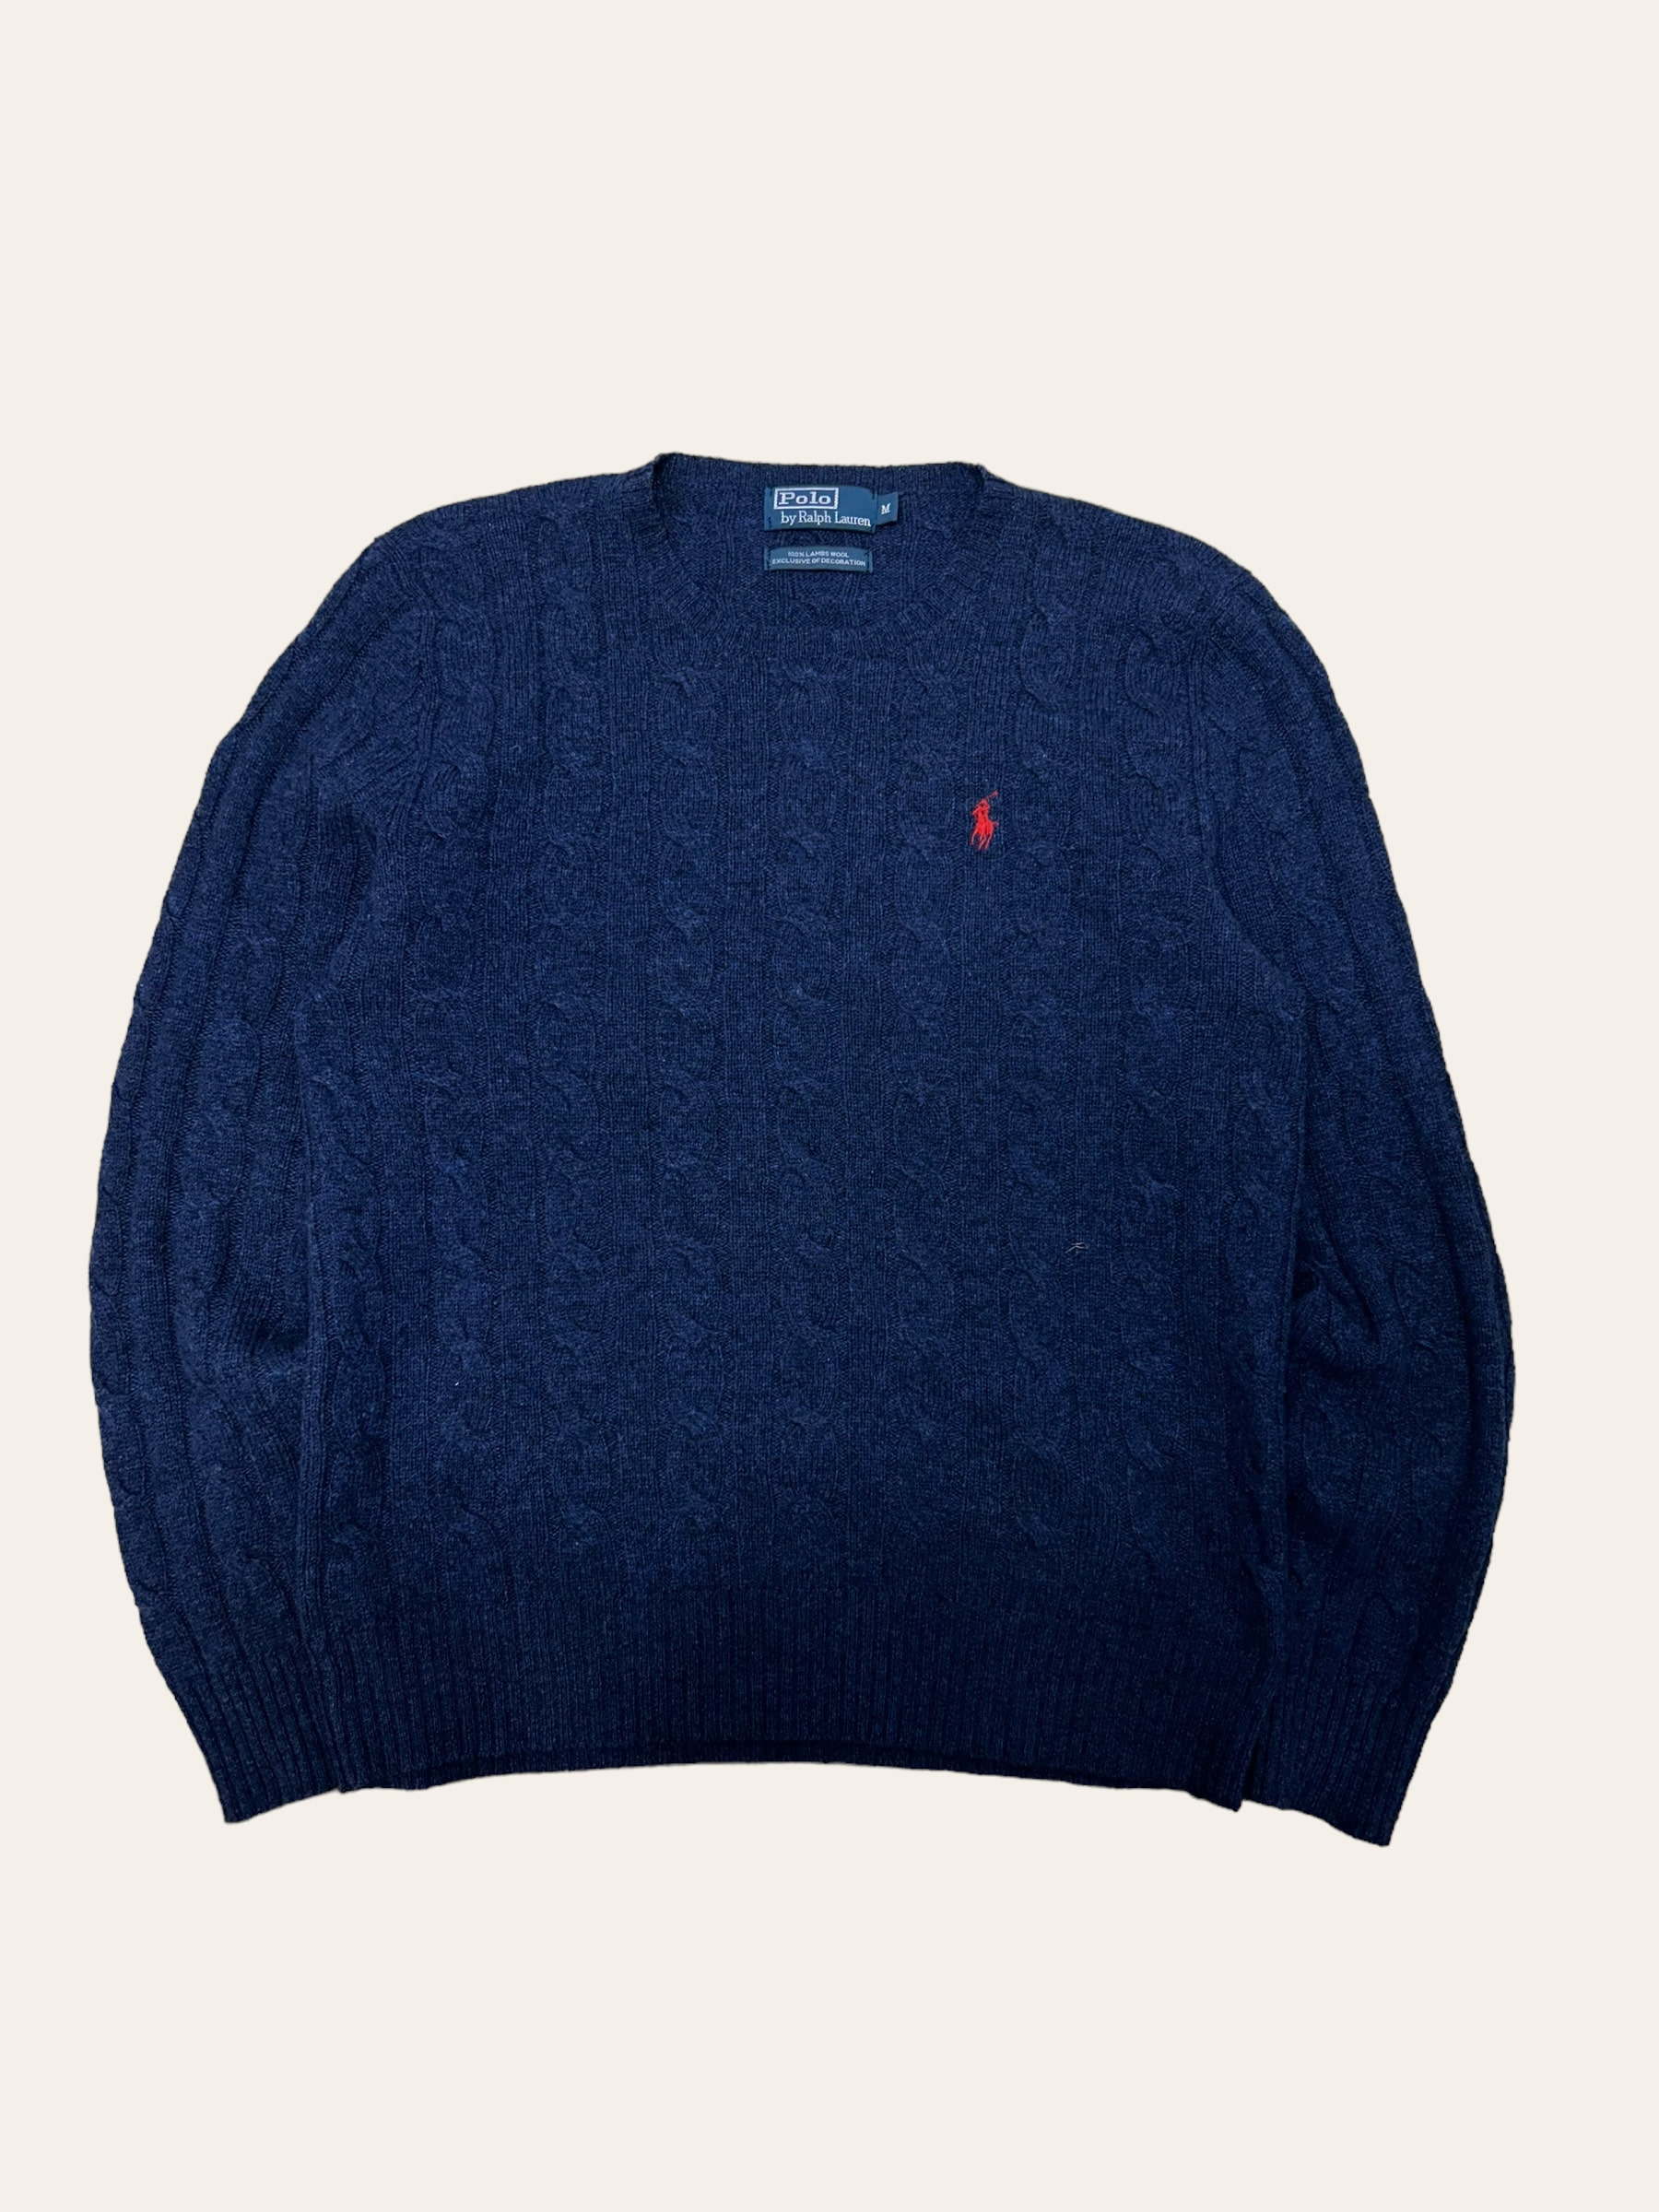 Polo ralph lauren navy lambswool cable sweater M